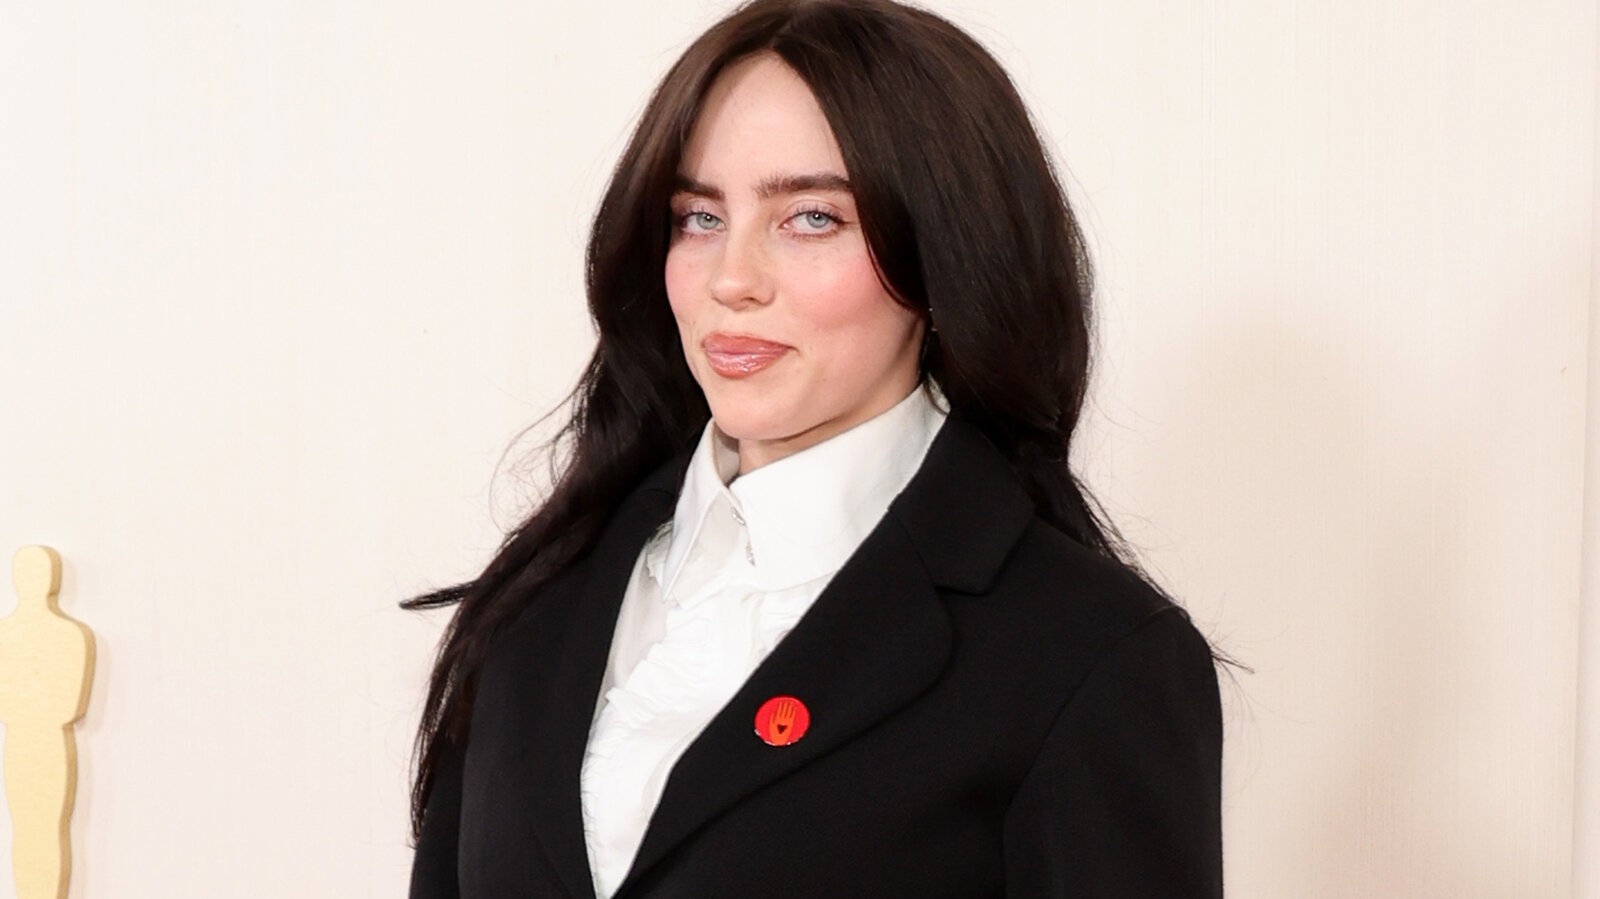 Billie Eilish was spotted with the red lapel pin (Credits: The New York Times)